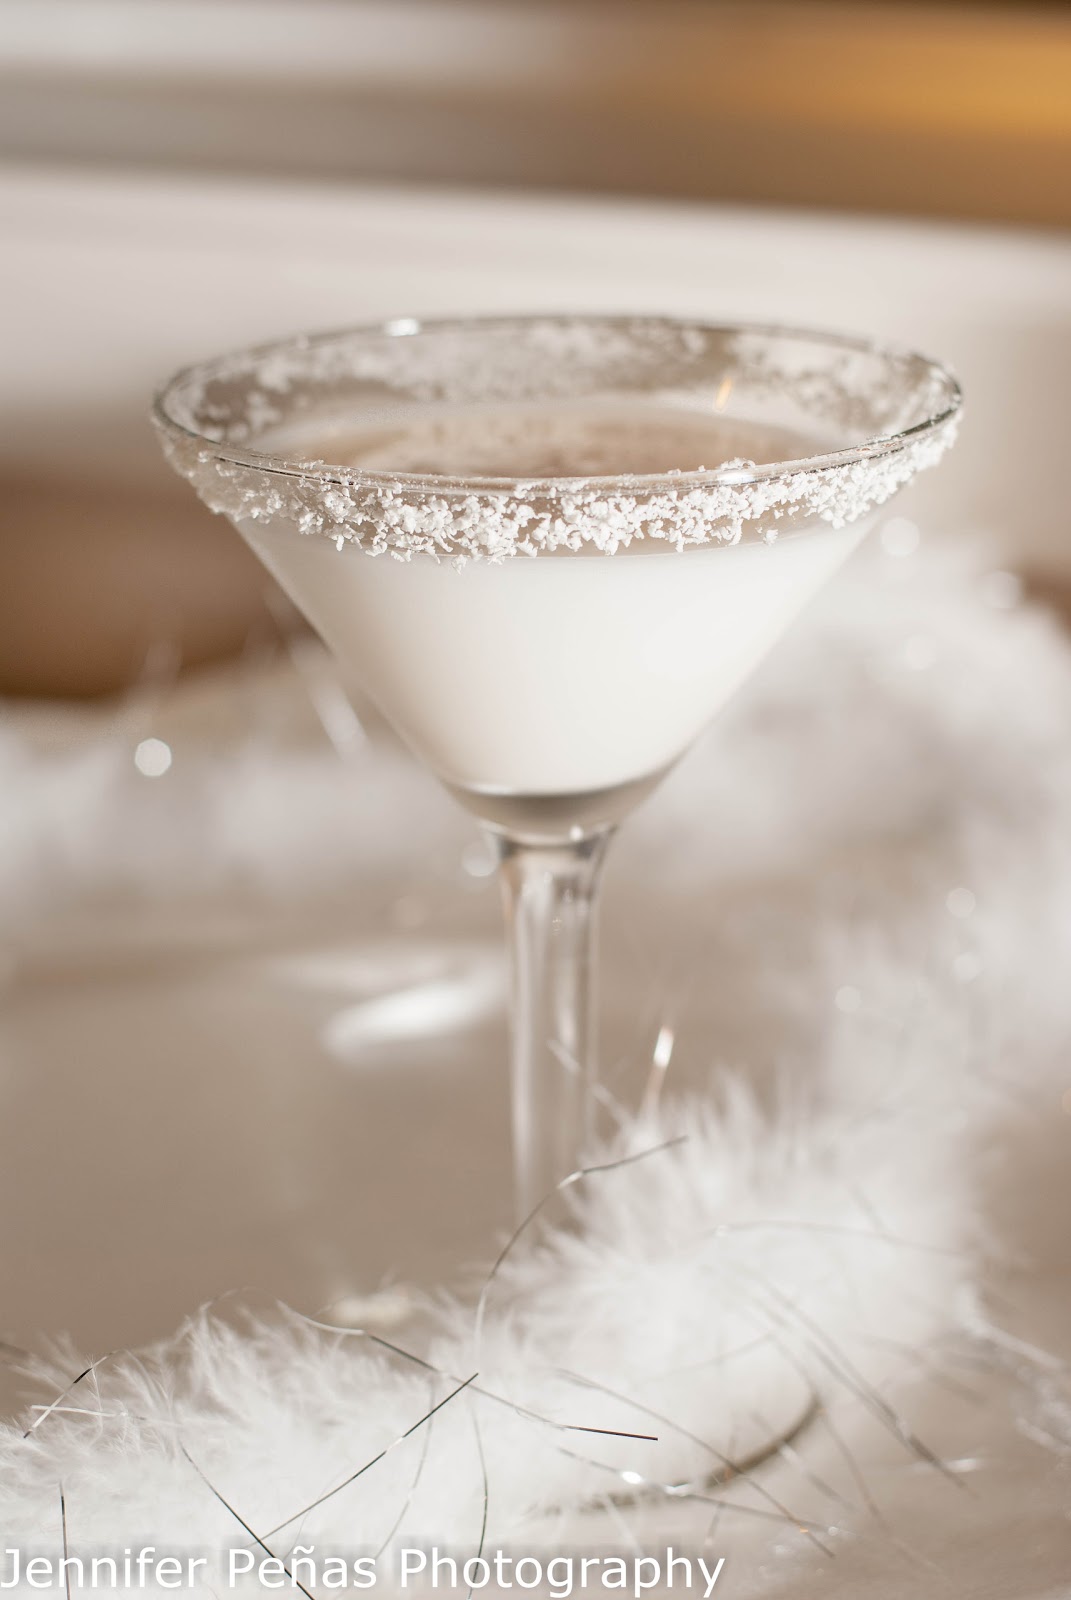 Snow White Chocolate Martini - A Year of Cocktails